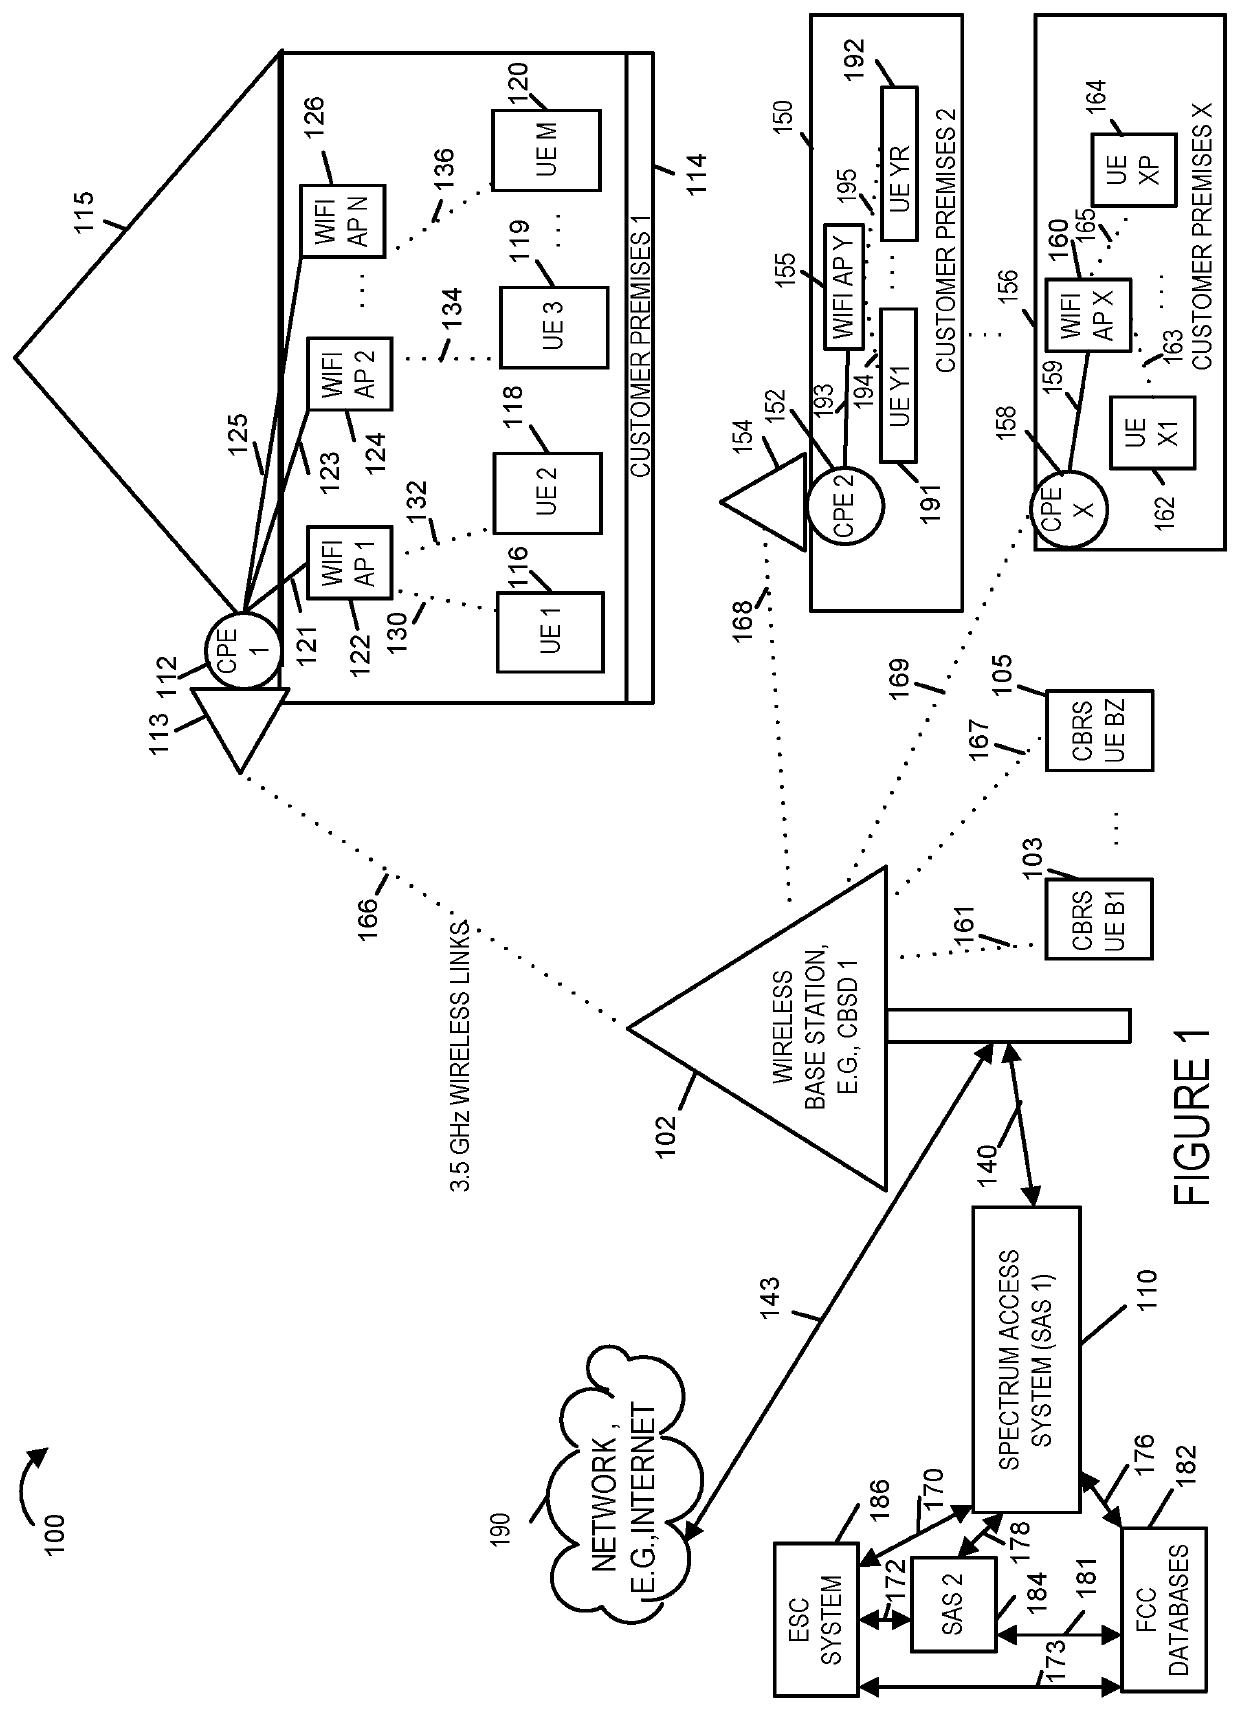 Methods and apparatus for managing uplink resource grants in wireless networks